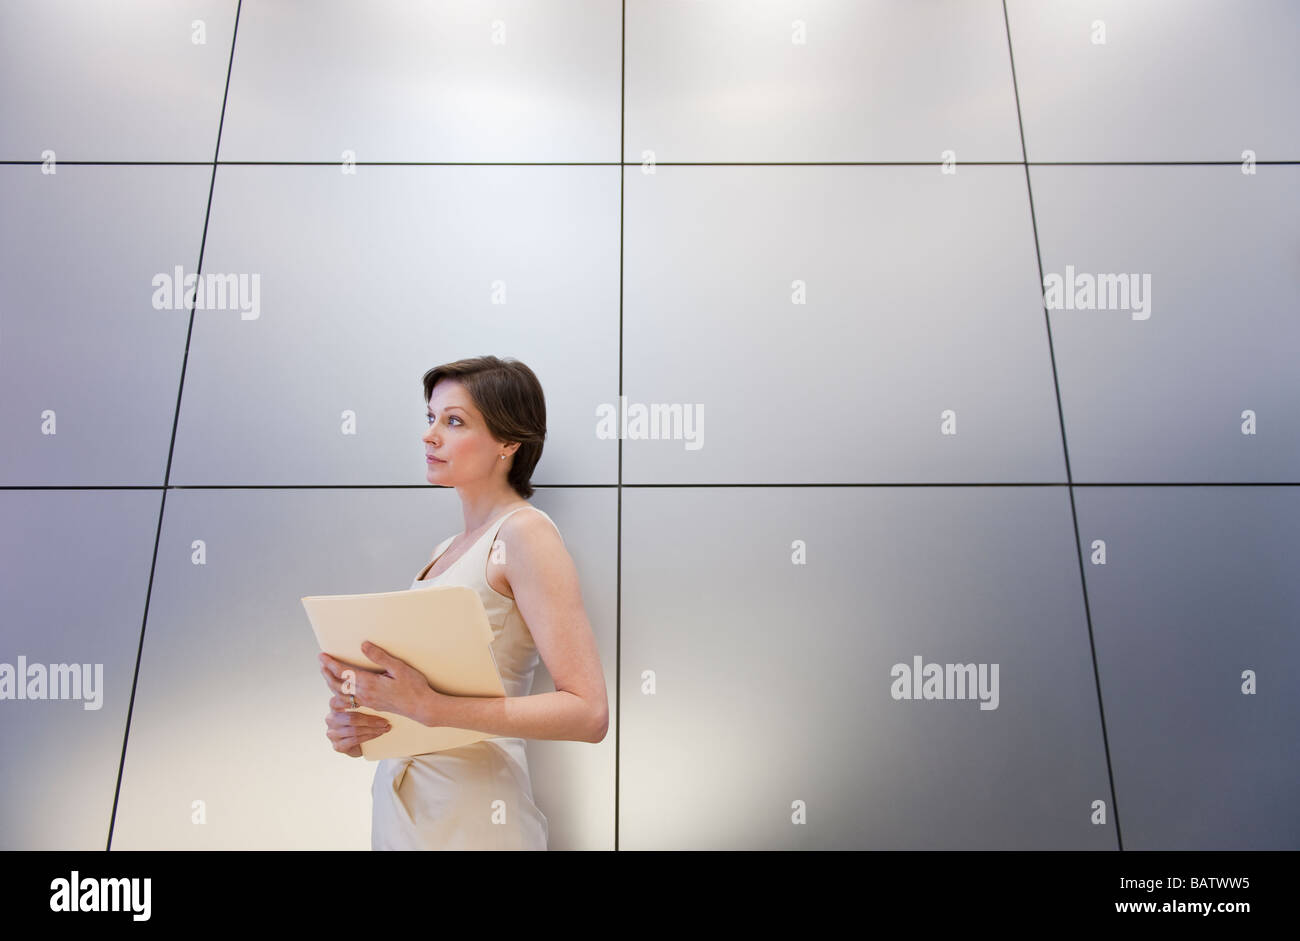 Young businesswoman holding document, low angle view Banque D'Images